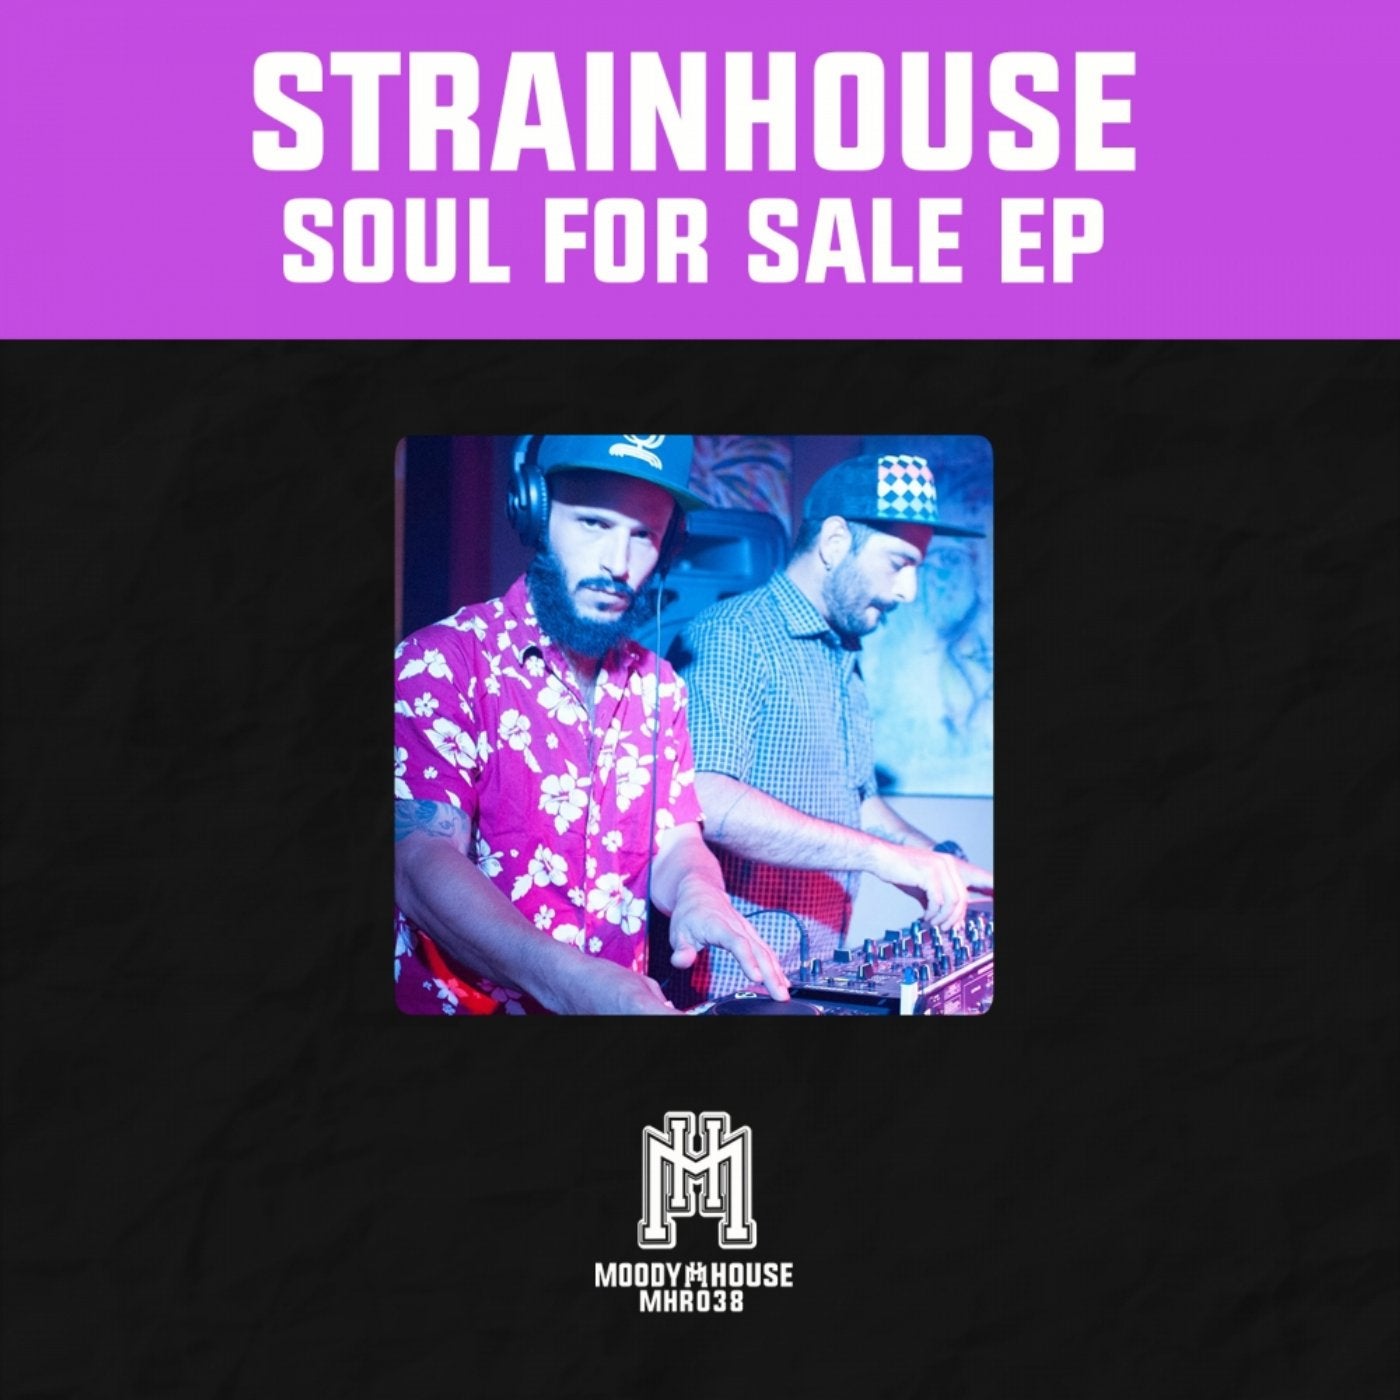 Soul For Sale EP